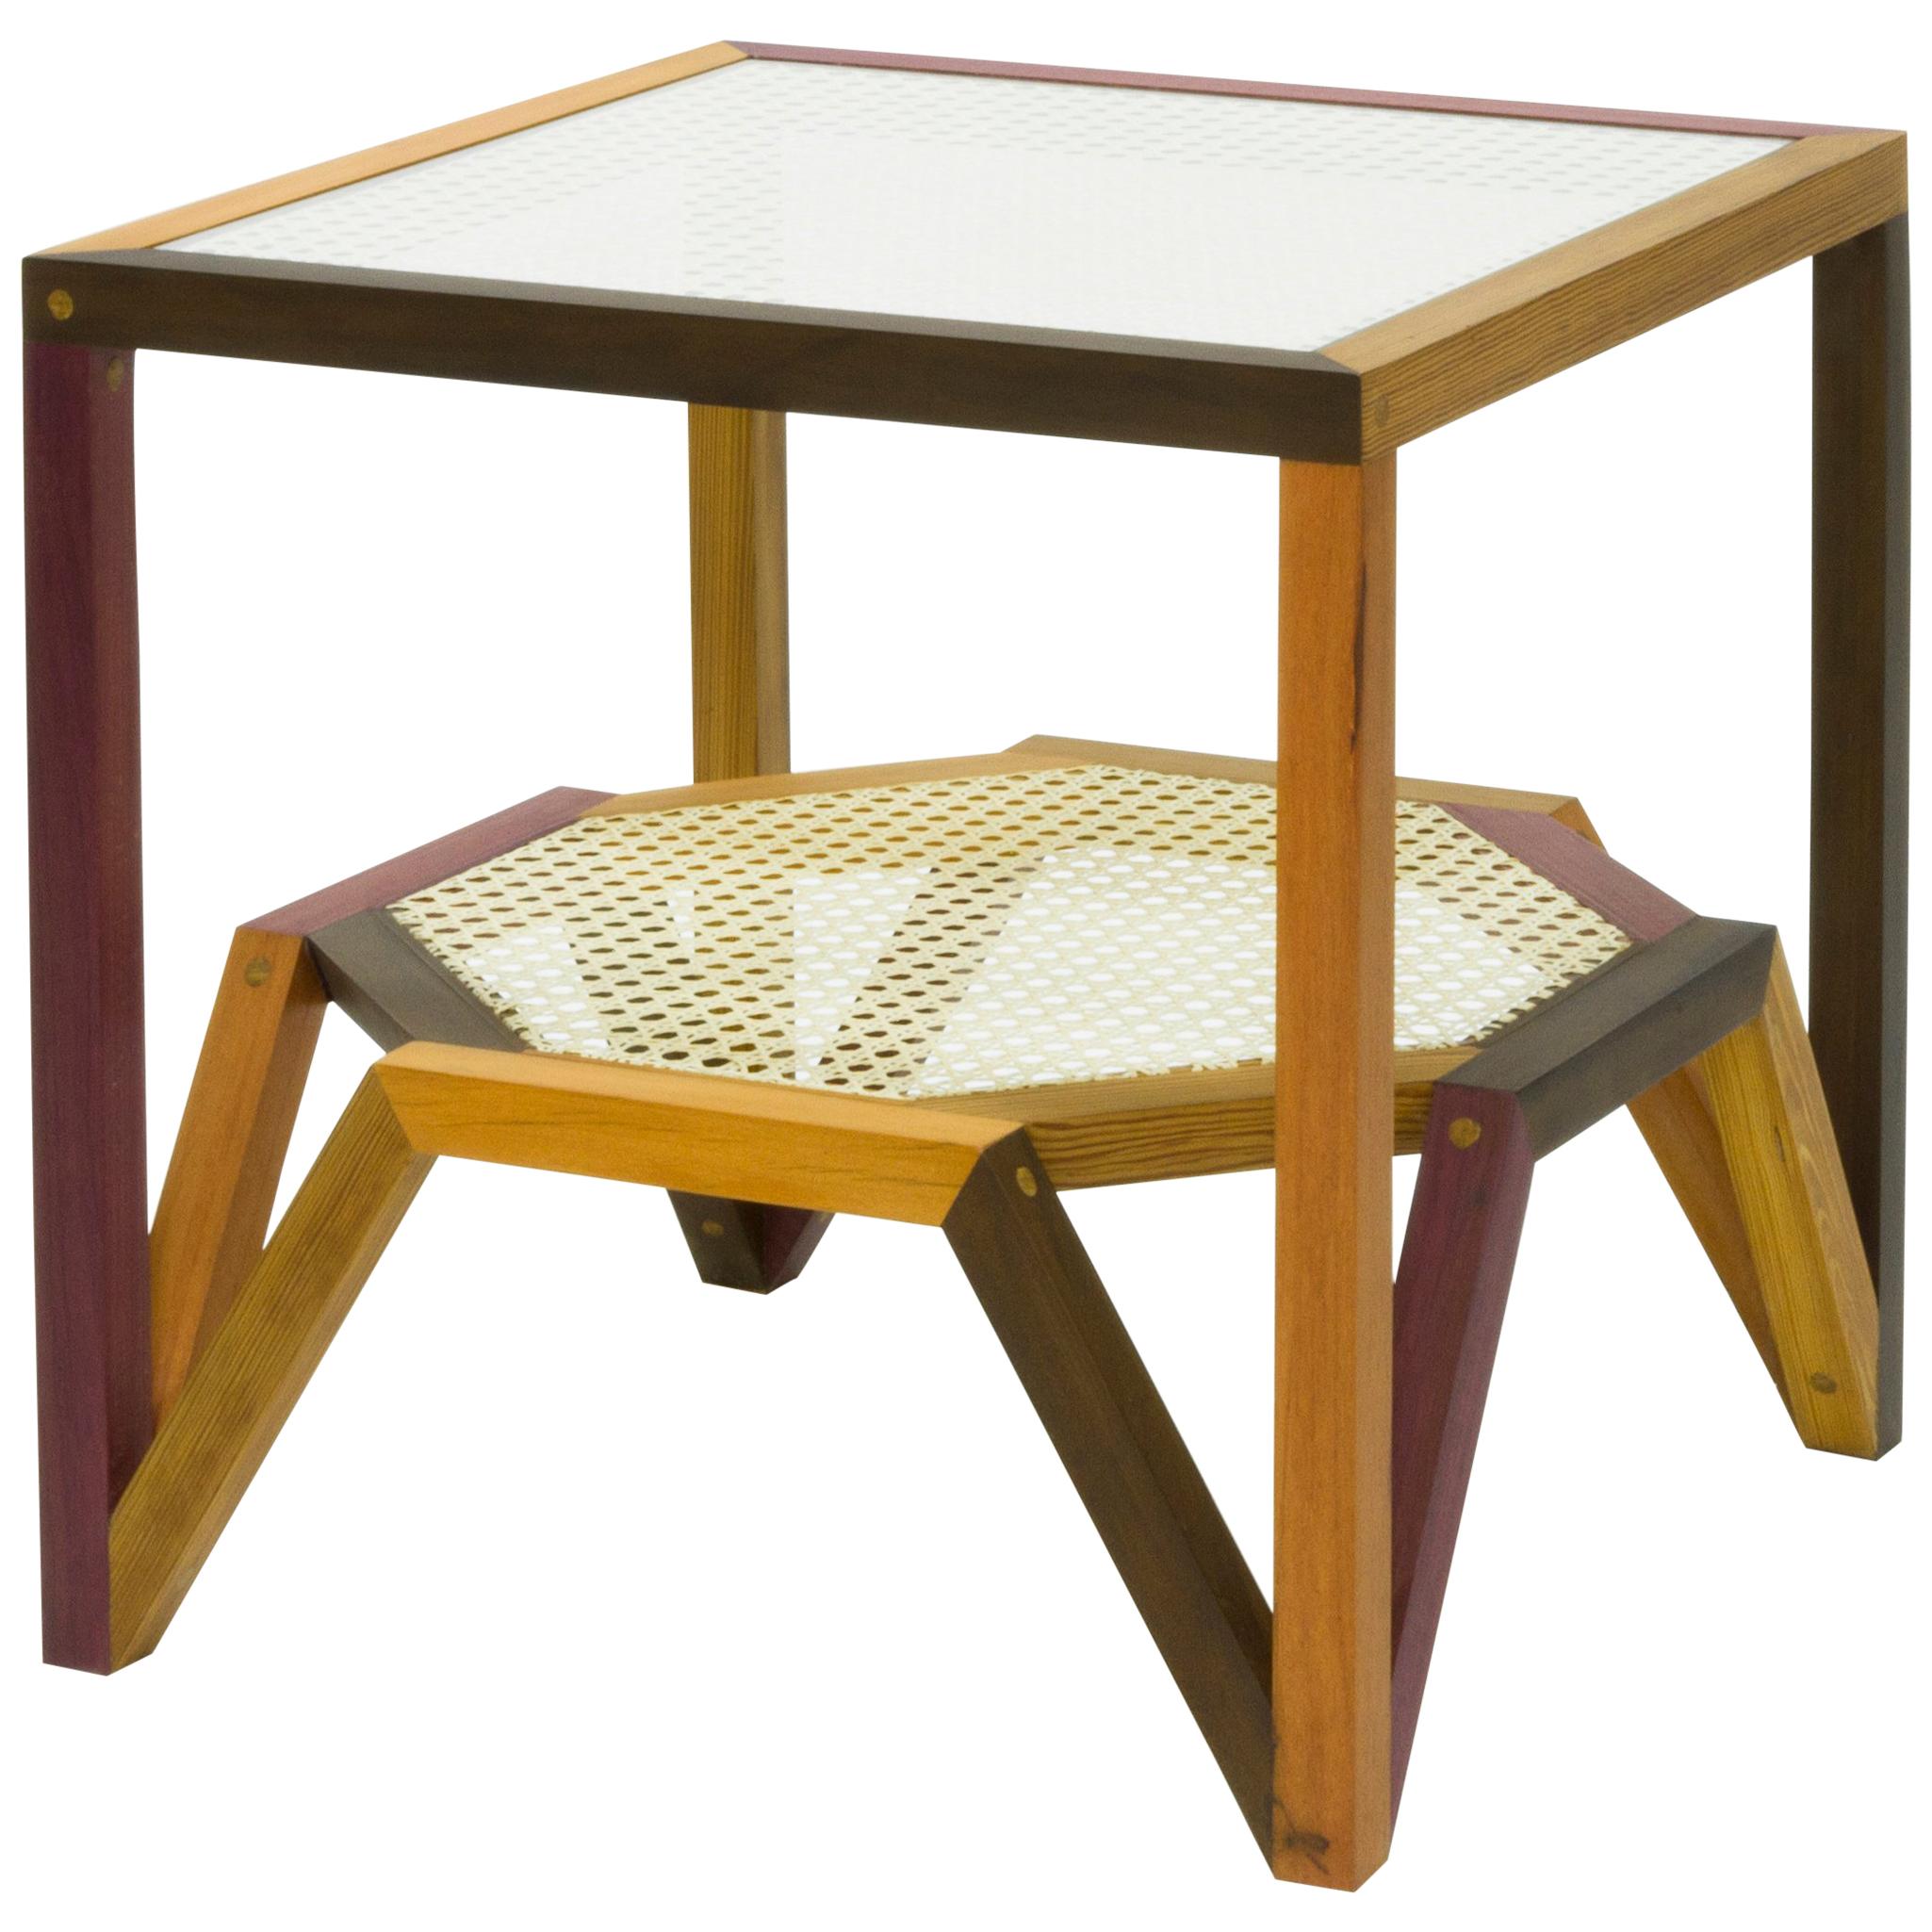 Side Table in Multiple Hardwood and Woven Cane, Brazilian Contemporary Design For Sale